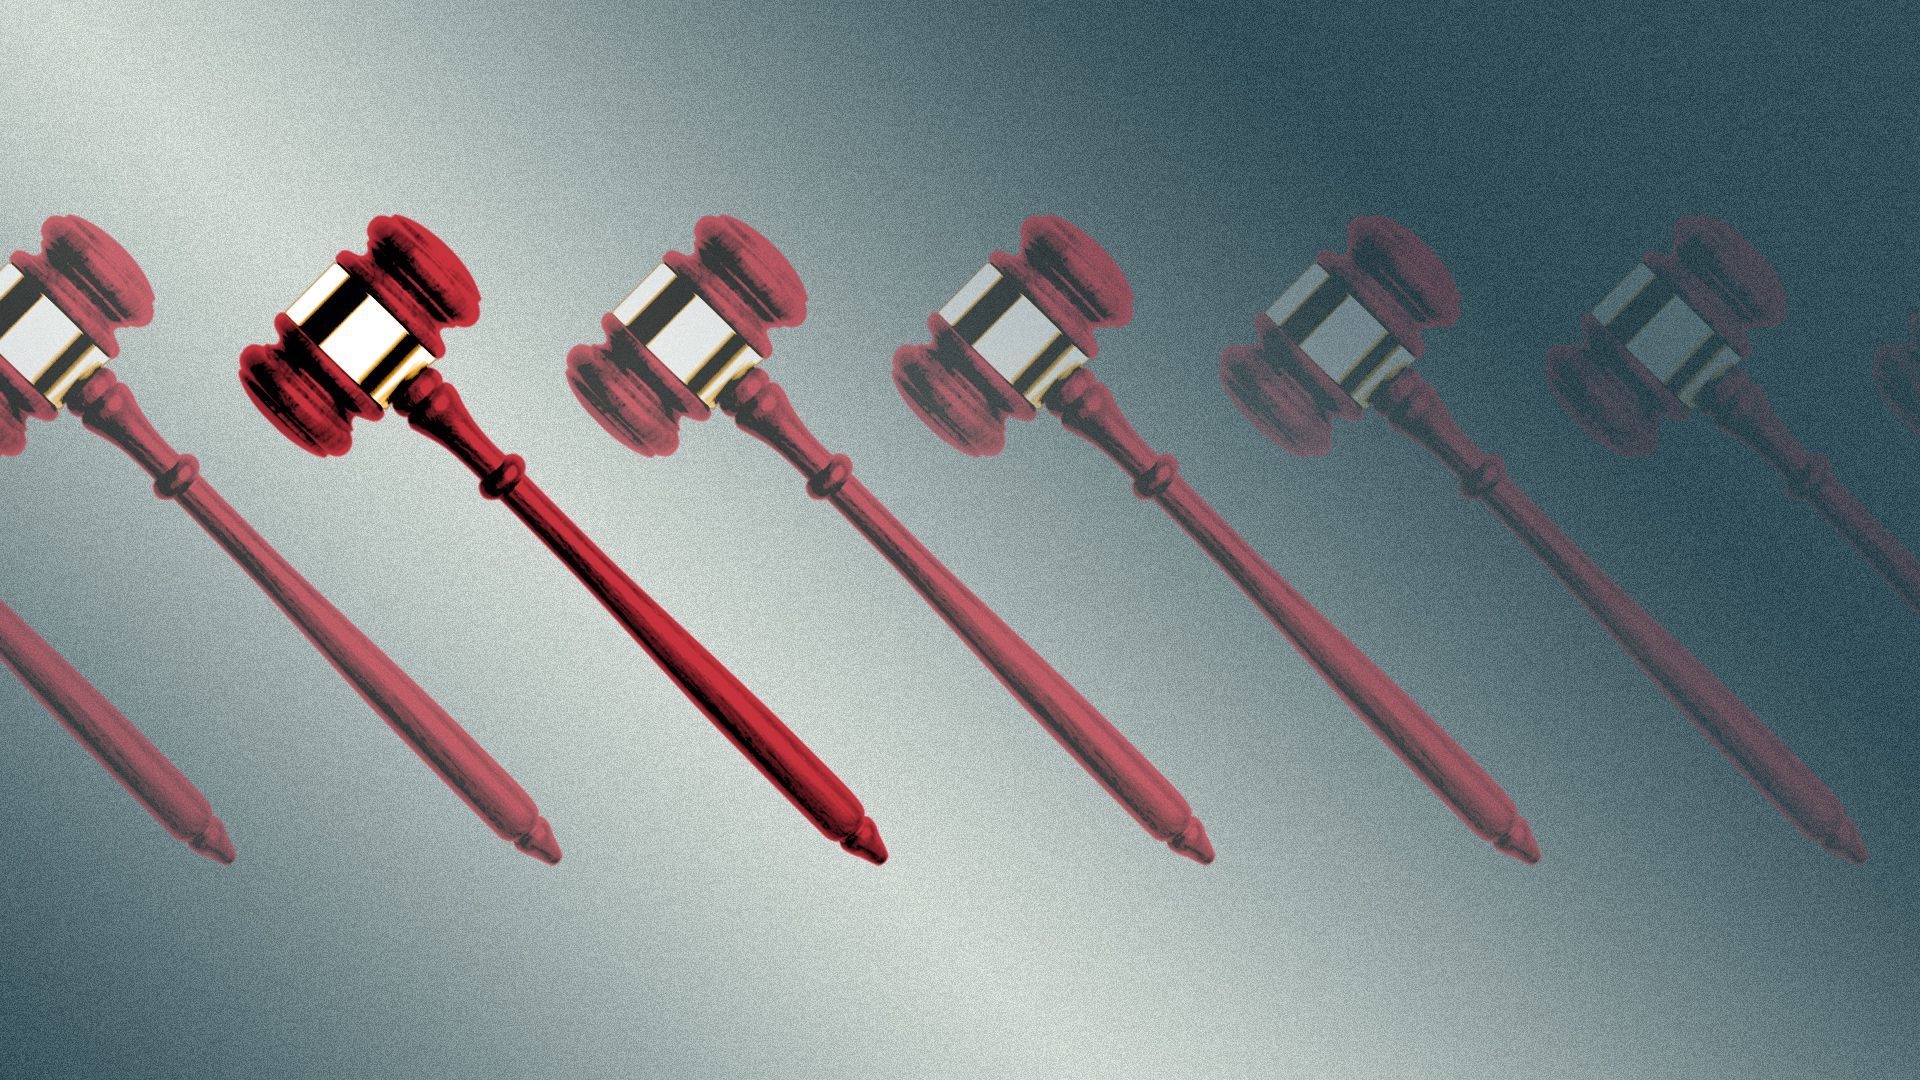 Illustration of a row of gavels, with all but one of them transparent.